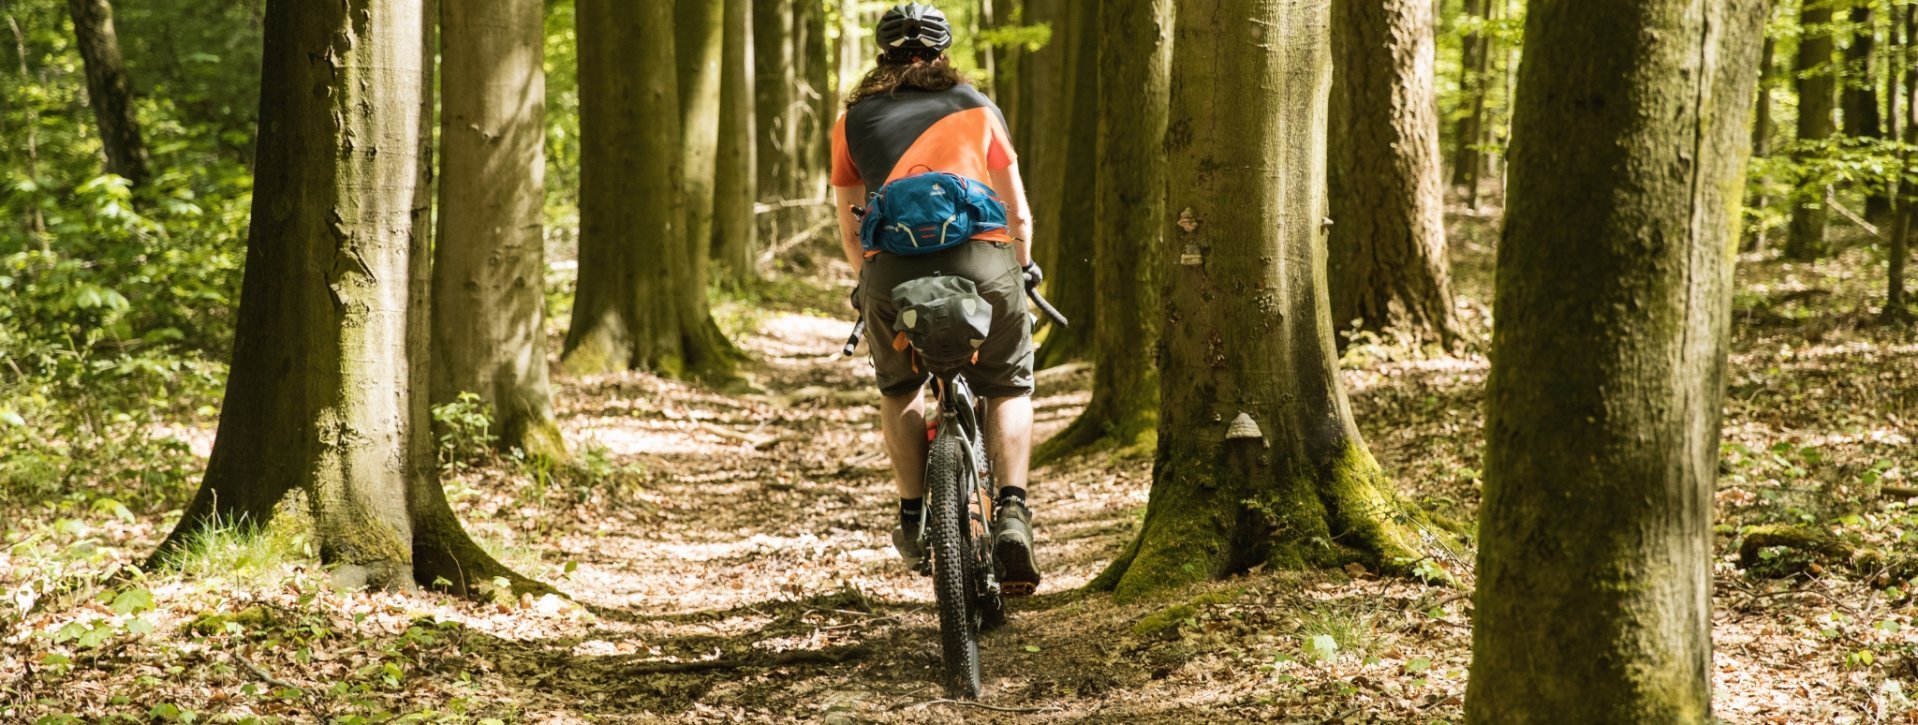 The deuter Pulse 1, 2 & 3 series hip packs. The perfect way to get out on the trail and enjoy your bike while taking everything you need with you. Avialable at bike-components.de.